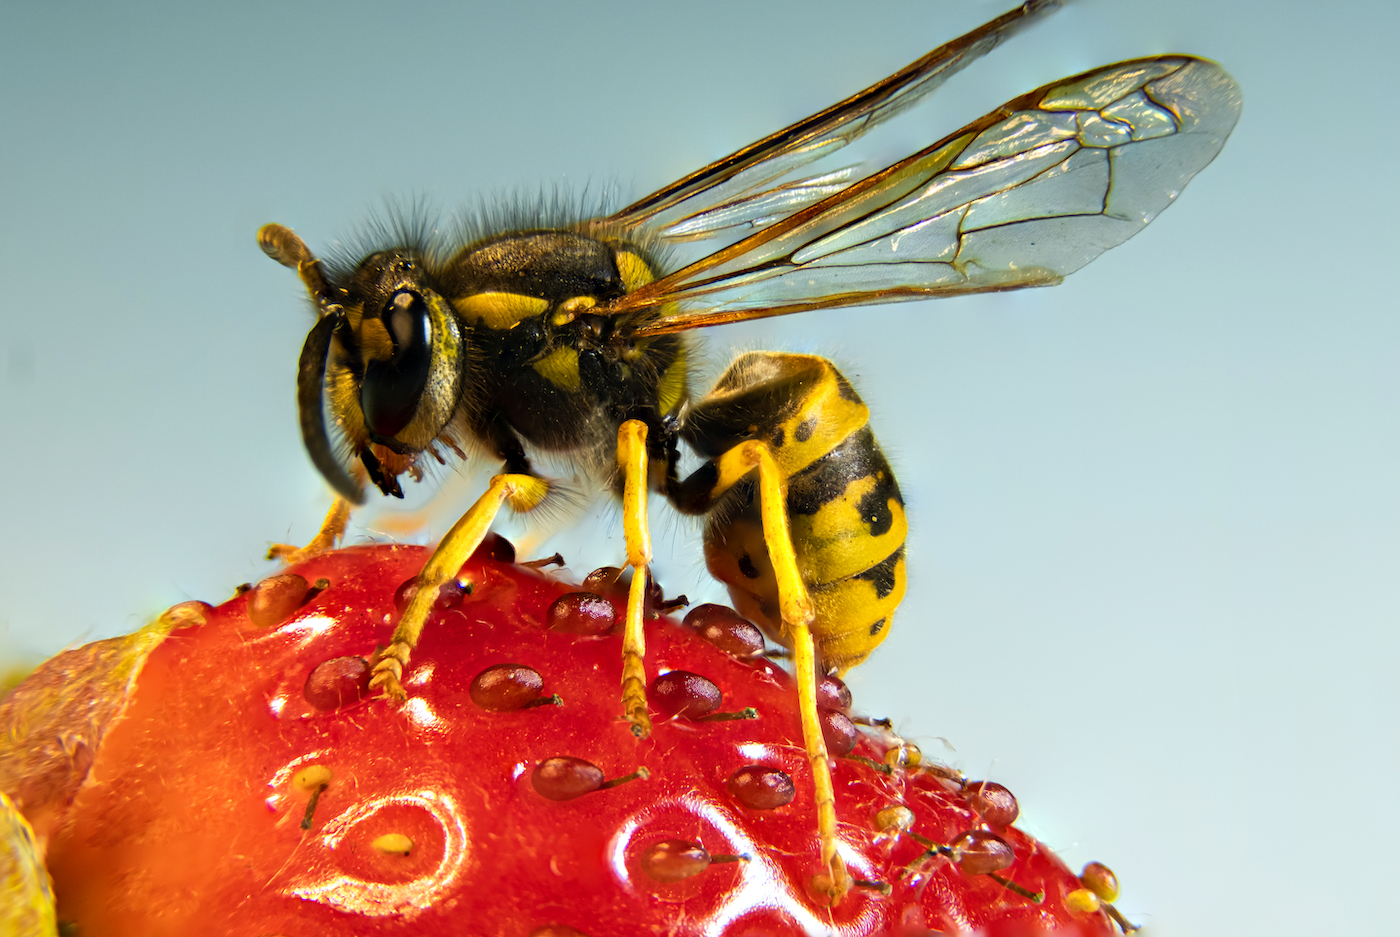 A black and white wasp with a hairy torso and thin wings is perched atop a red strawberry.